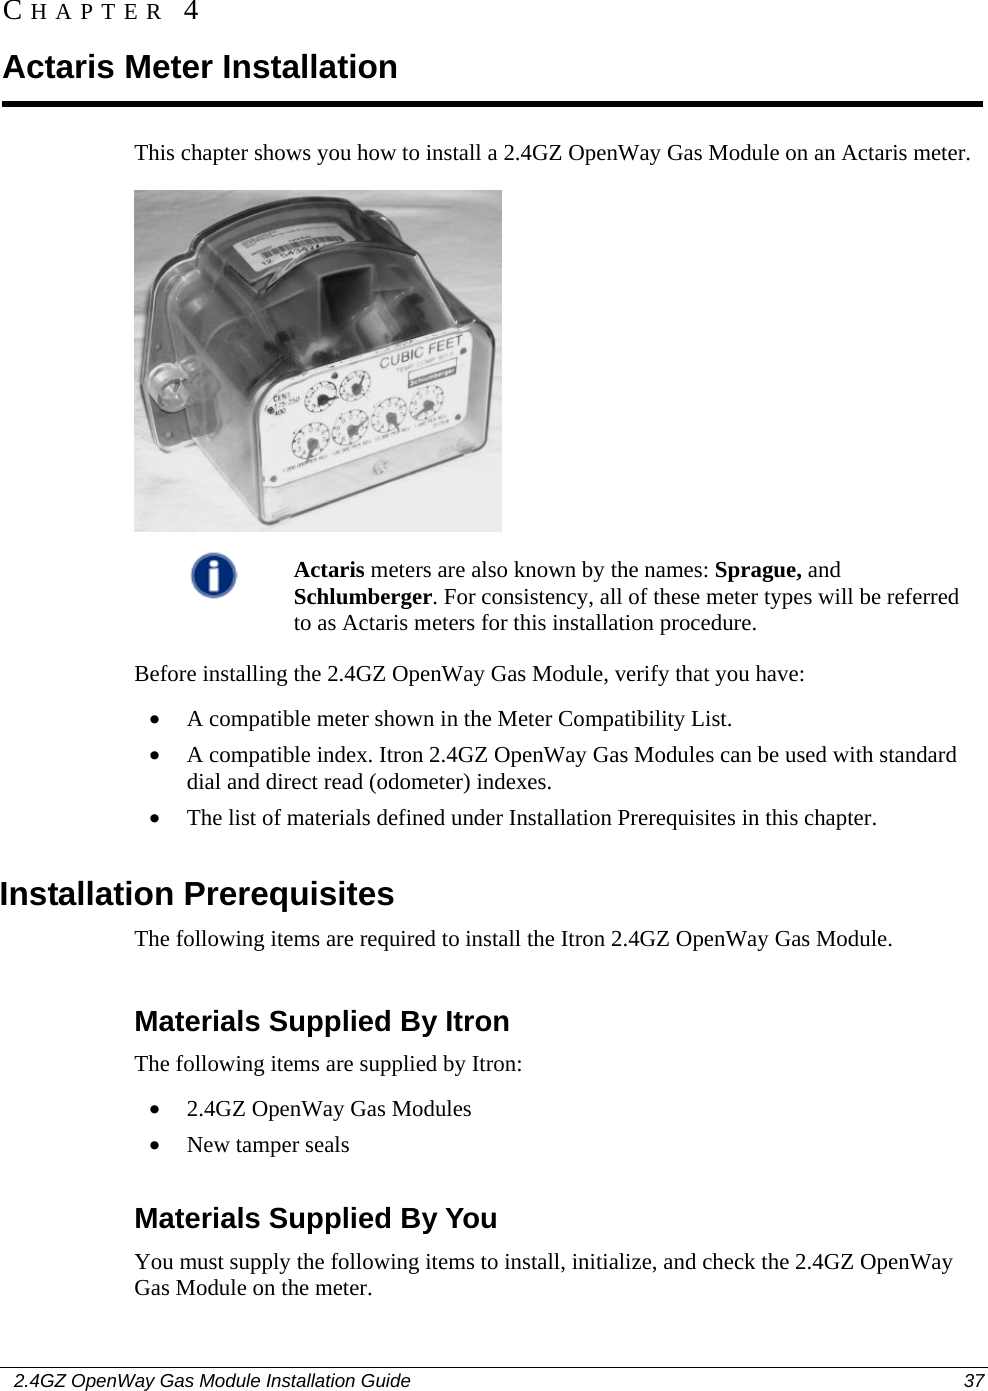    2.4GZ OpenWay Gas Module Installation Guide  37  This chapter shows you how to install a 2.4GZ OpenWay Gas Module on an Actaris meter.   Actaris meters are also known by the names: Sprague, and Schlumberger. For consistency, all of these meter types will be referred to as Actaris meters for this installation procedure.  Before installing the 2.4GZ OpenWay Gas Module, verify that you have: • A compatible meter shown in the Meter Compatibility List. • A compatible index. Itron 2.4GZ OpenWay Gas Modules can be used with standard dial and direct read (odometer) indexes. • The list of materials defined under Installation Prerequisites in this chapter.  Installation Prerequisites The following items are required to install the Itron 2.4GZ OpenWay Gas Module.  Materials Supplied By Itron The following items are supplied by Itron: • 2.4GZ OpenWay Gas Modules • New tamper seals  Materials Supplied By You You must supply the following items to install, initialize, and check the 2.4GZ OpenWay Gas Module on the meter. CHAPTER 4 Actaris Meter Installation 